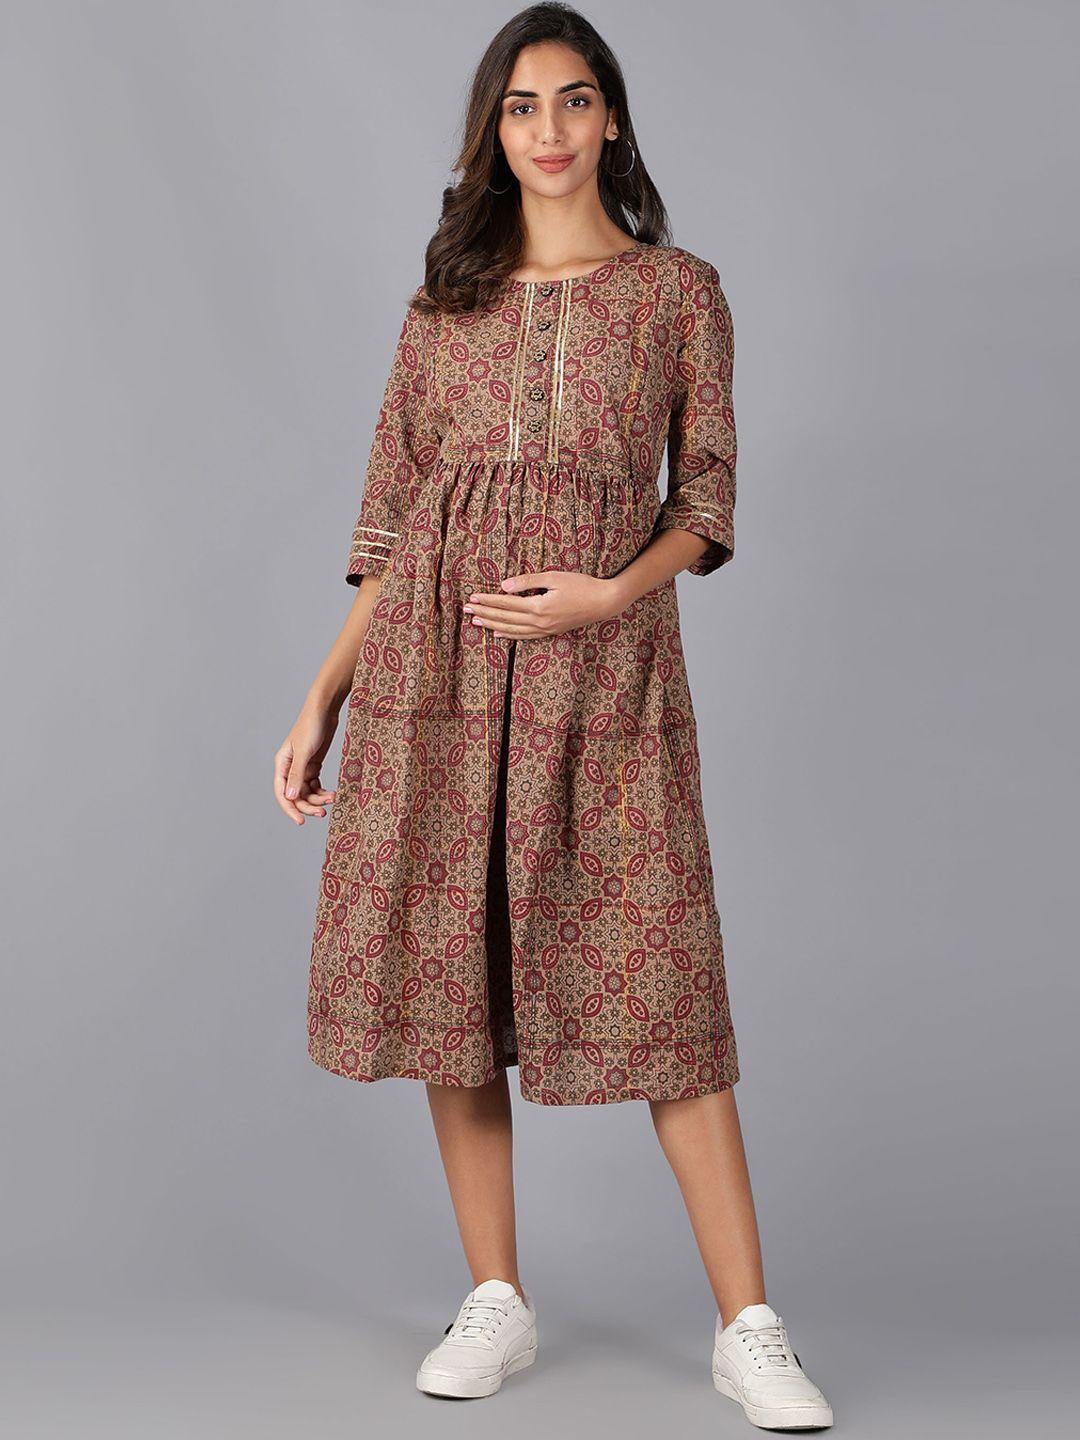 cot'n-soft-brown-ethnic-motifs-ethnic-printed-maternity-a-line-cotton-???????dress